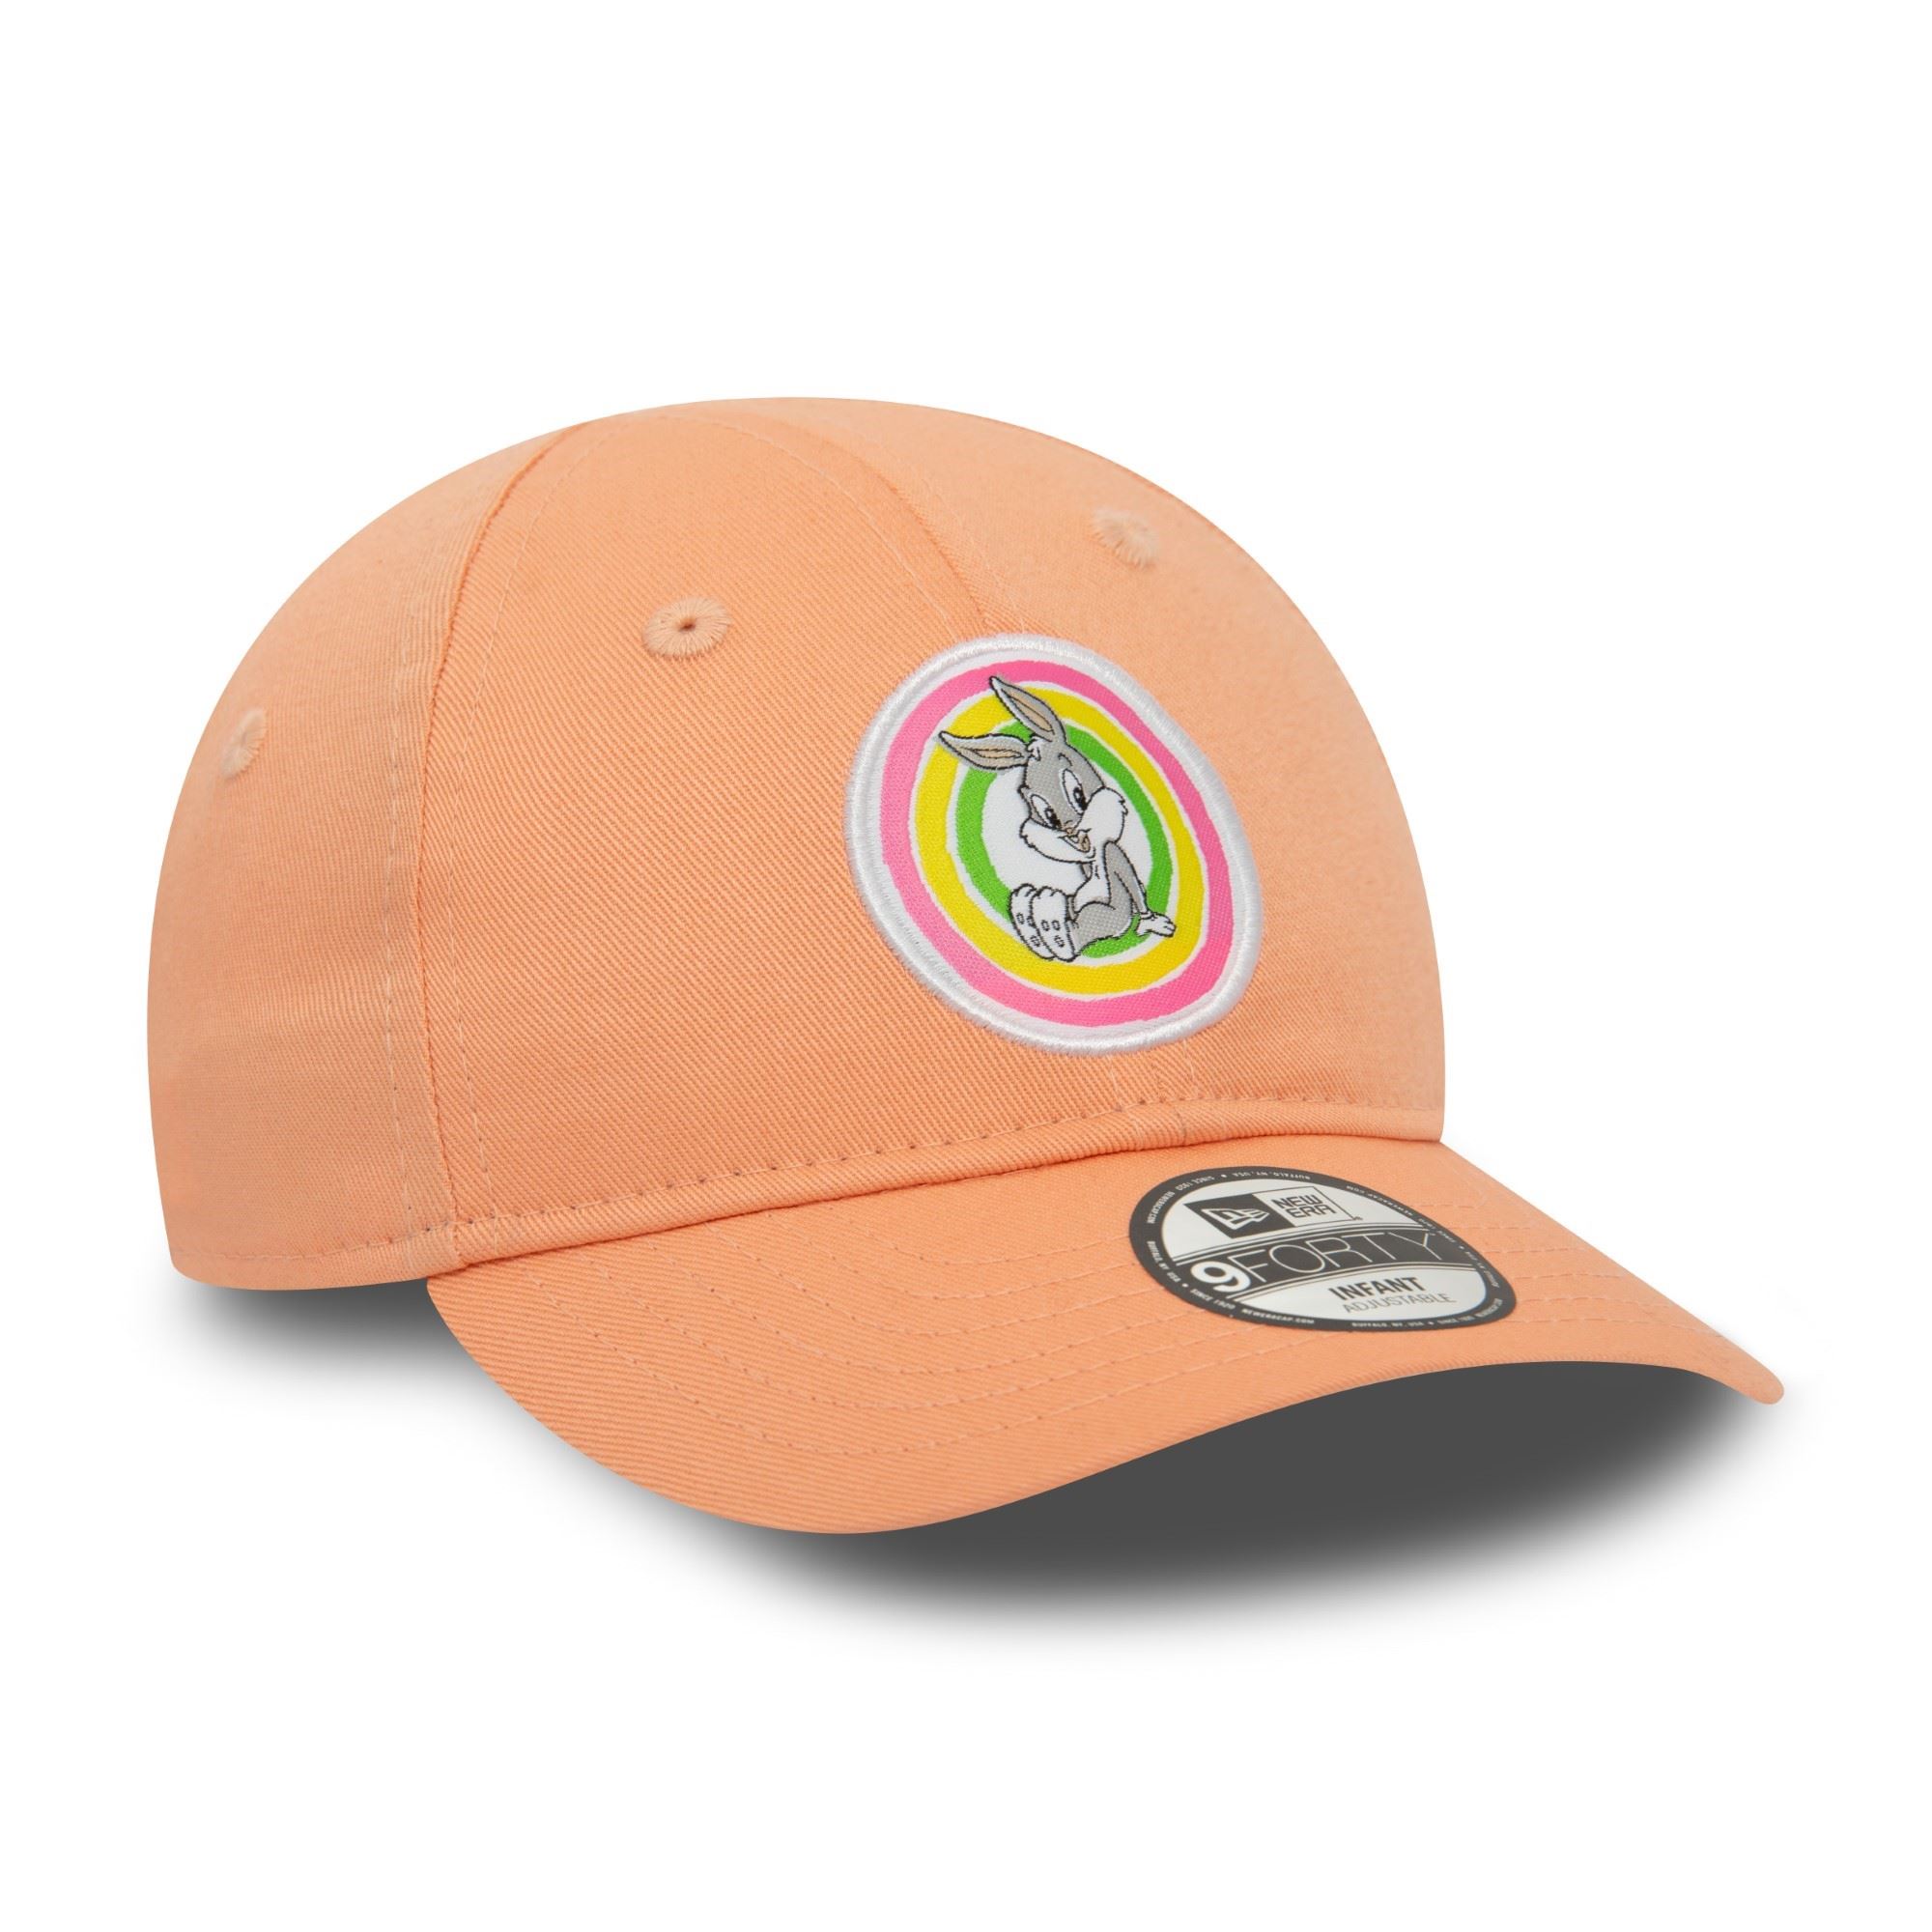 Bugs Bunny Looney Tunes Pastel Apricot 9Forty Infant Cap New Era